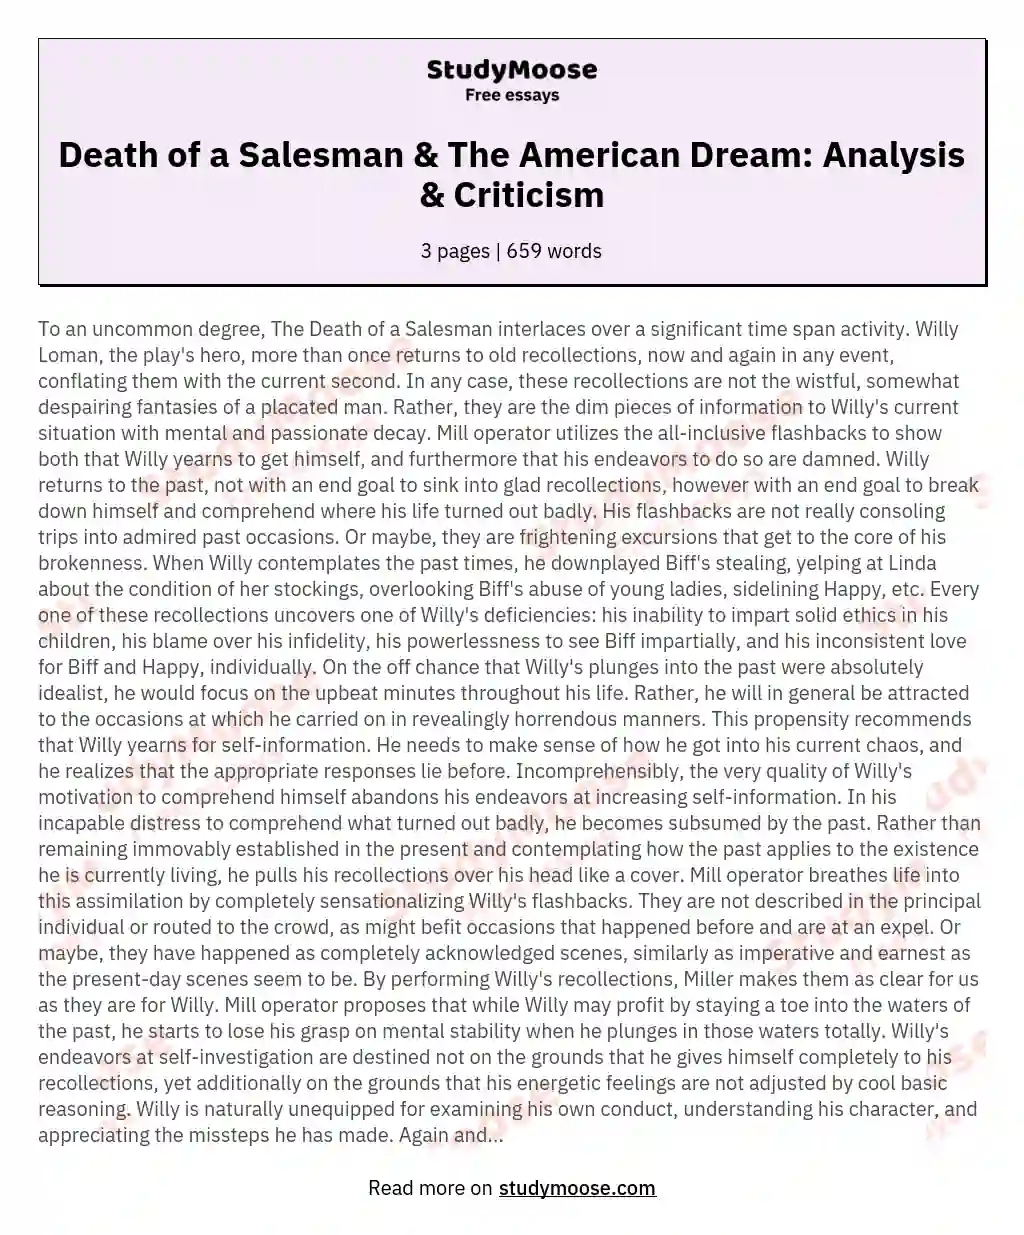 Death of a Salesman & The American Dream: Analysis & Criticism